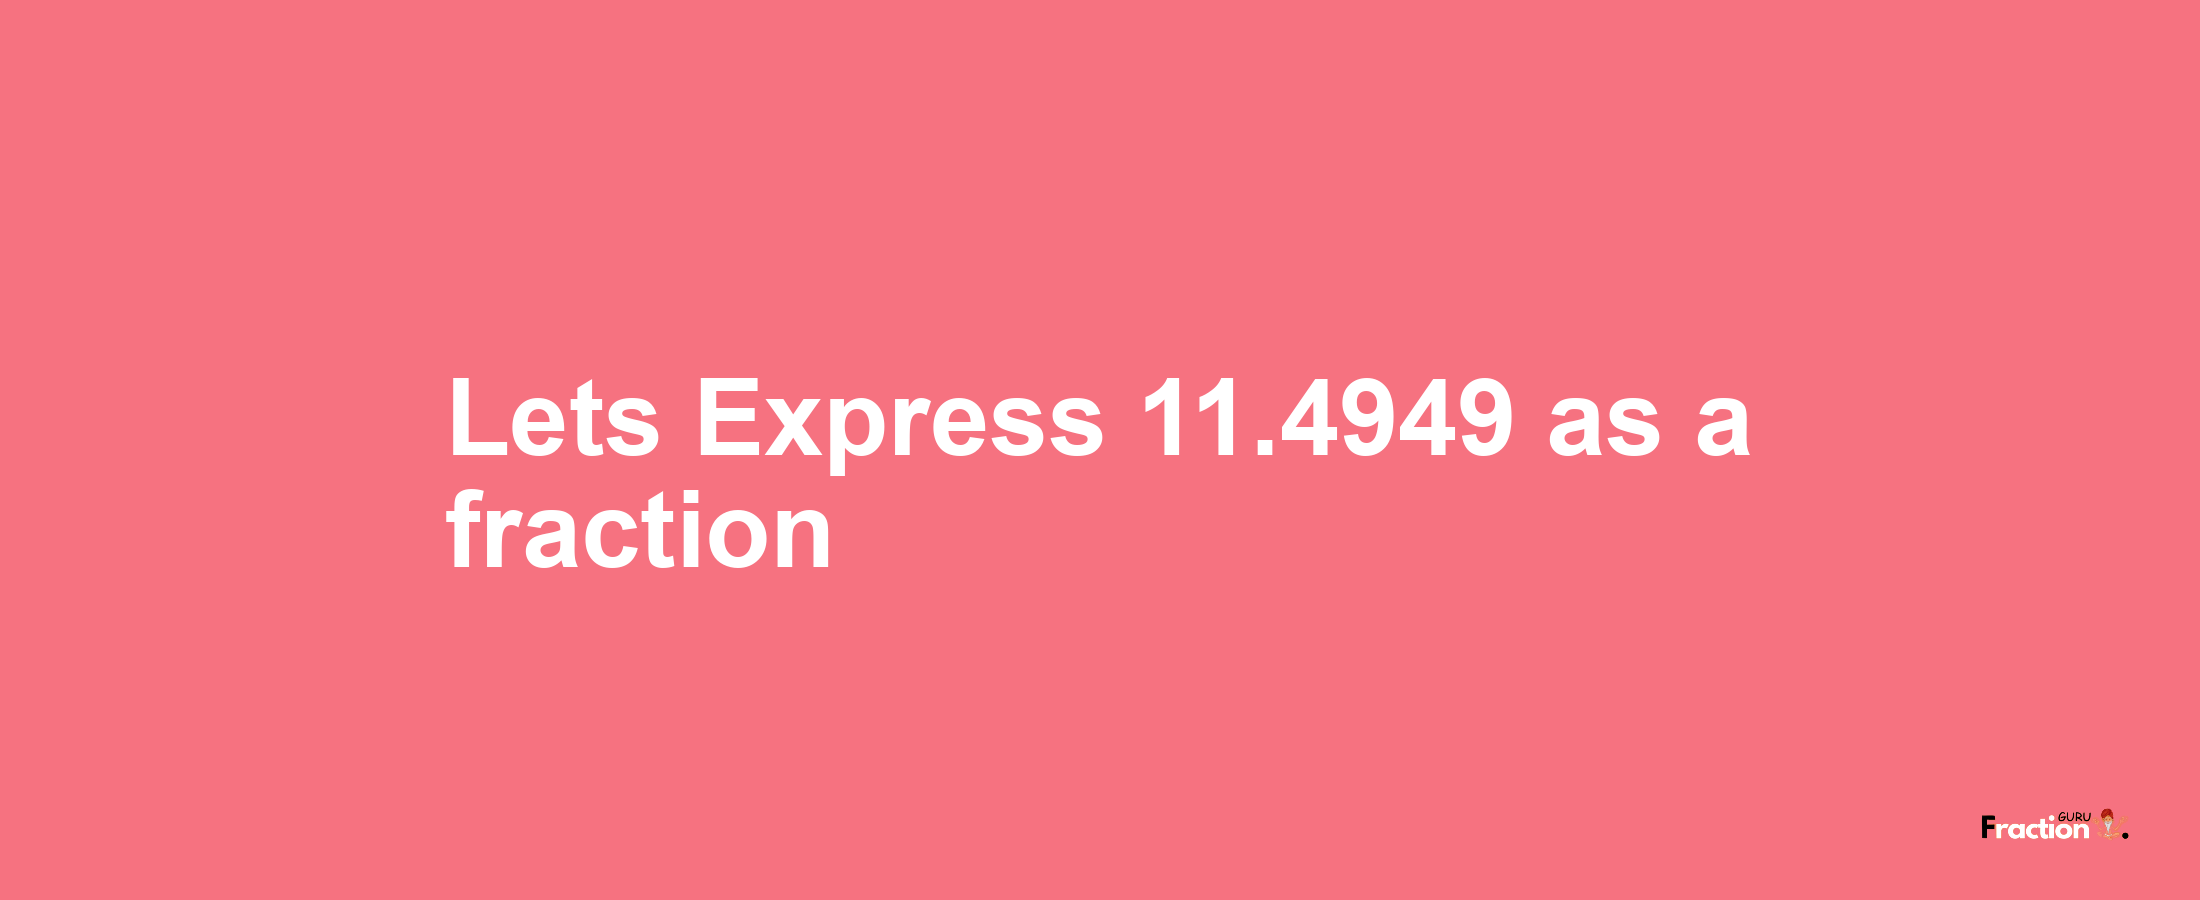 Lets Express 11.4949 as afraction